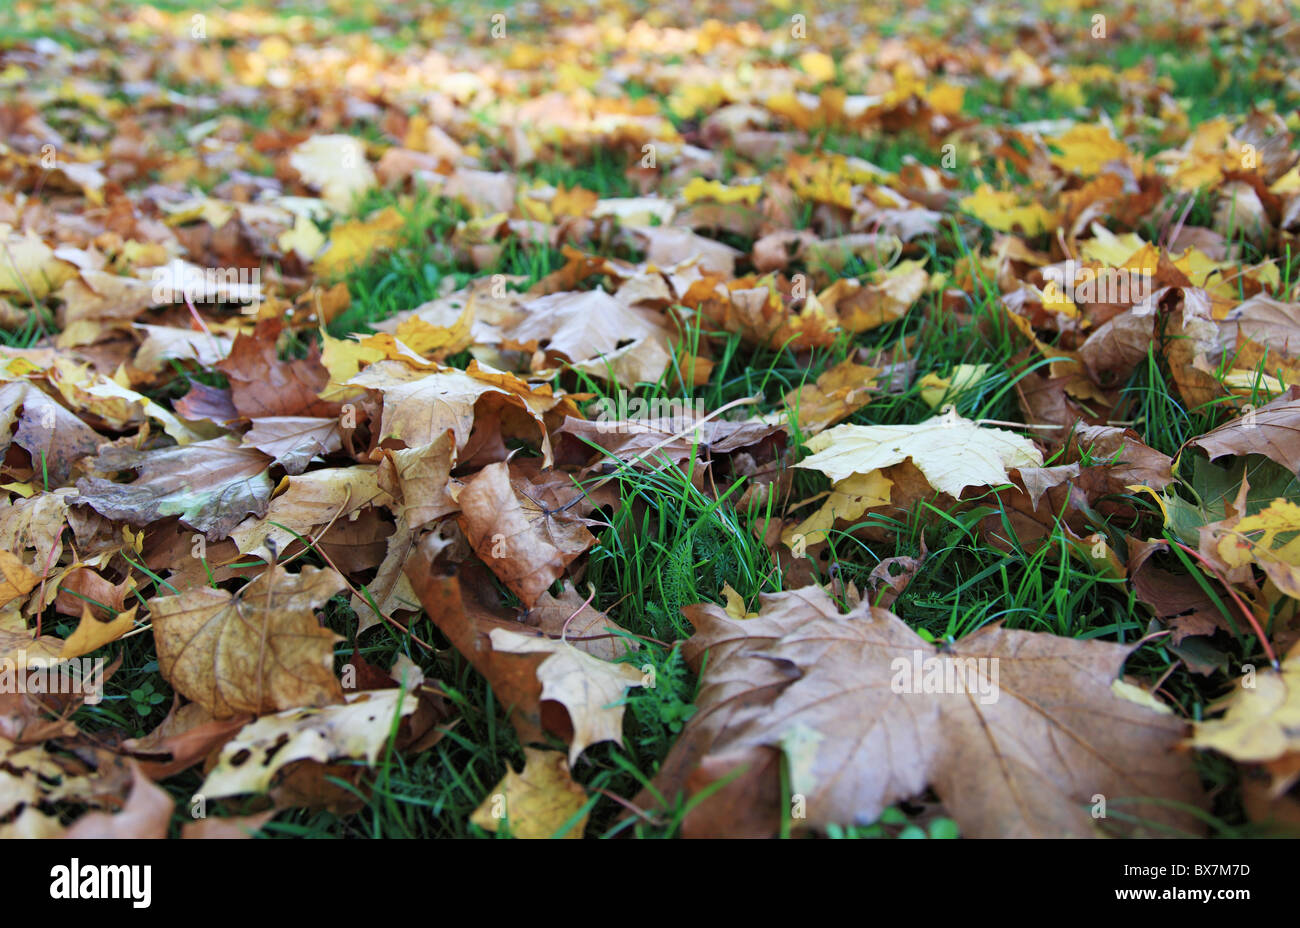 Falling leaves lying on the ground. Stock Photo